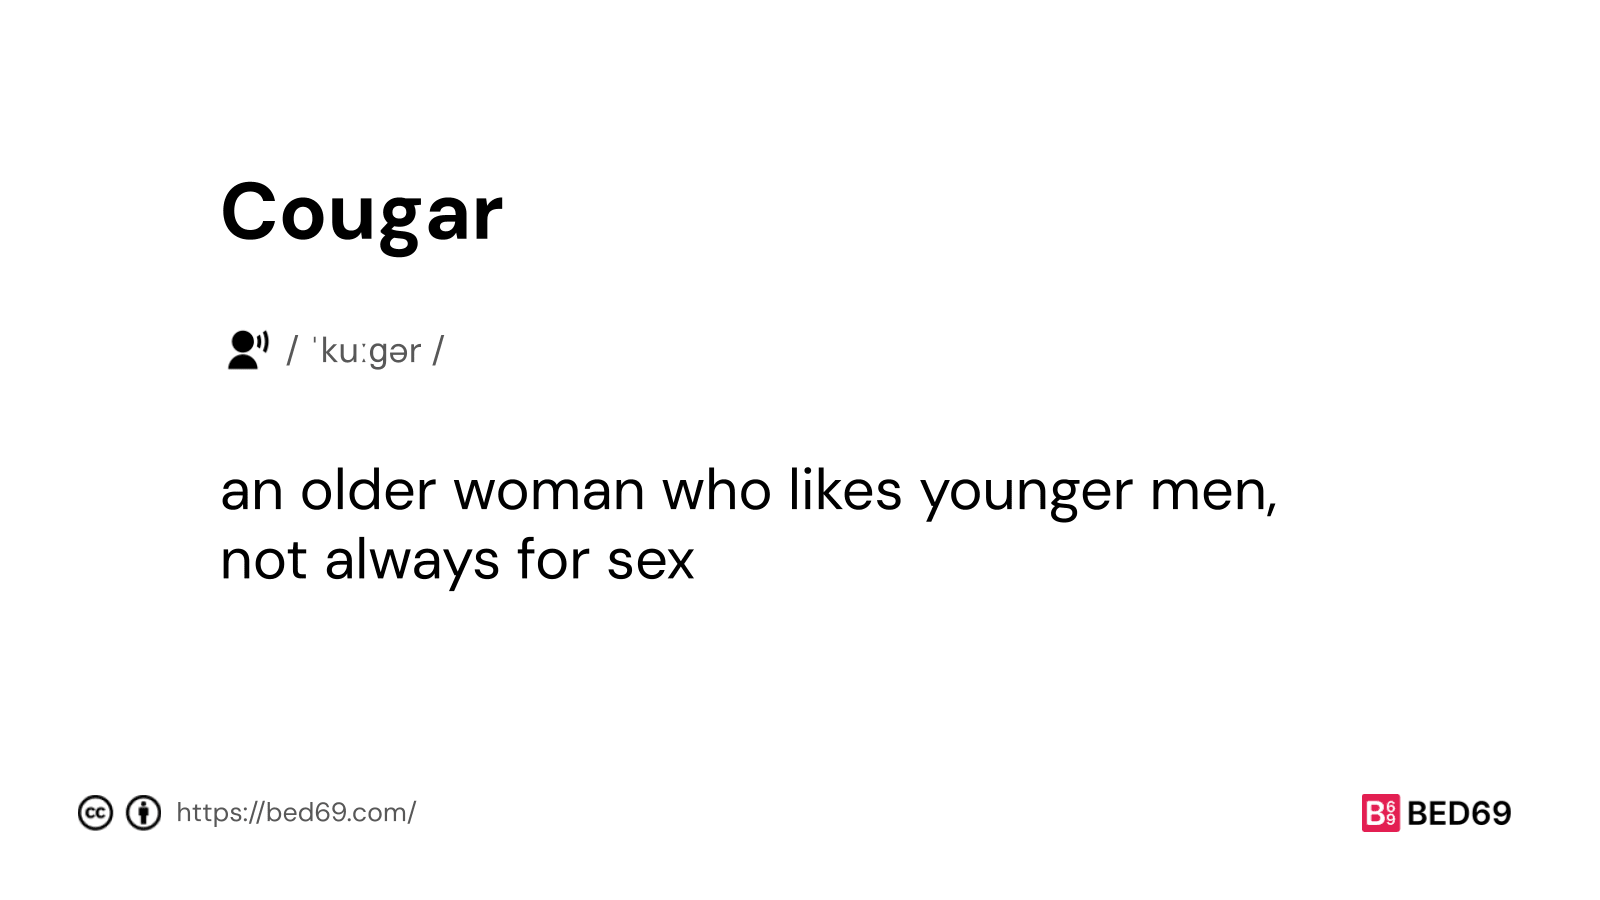 Cougar - Word Definition